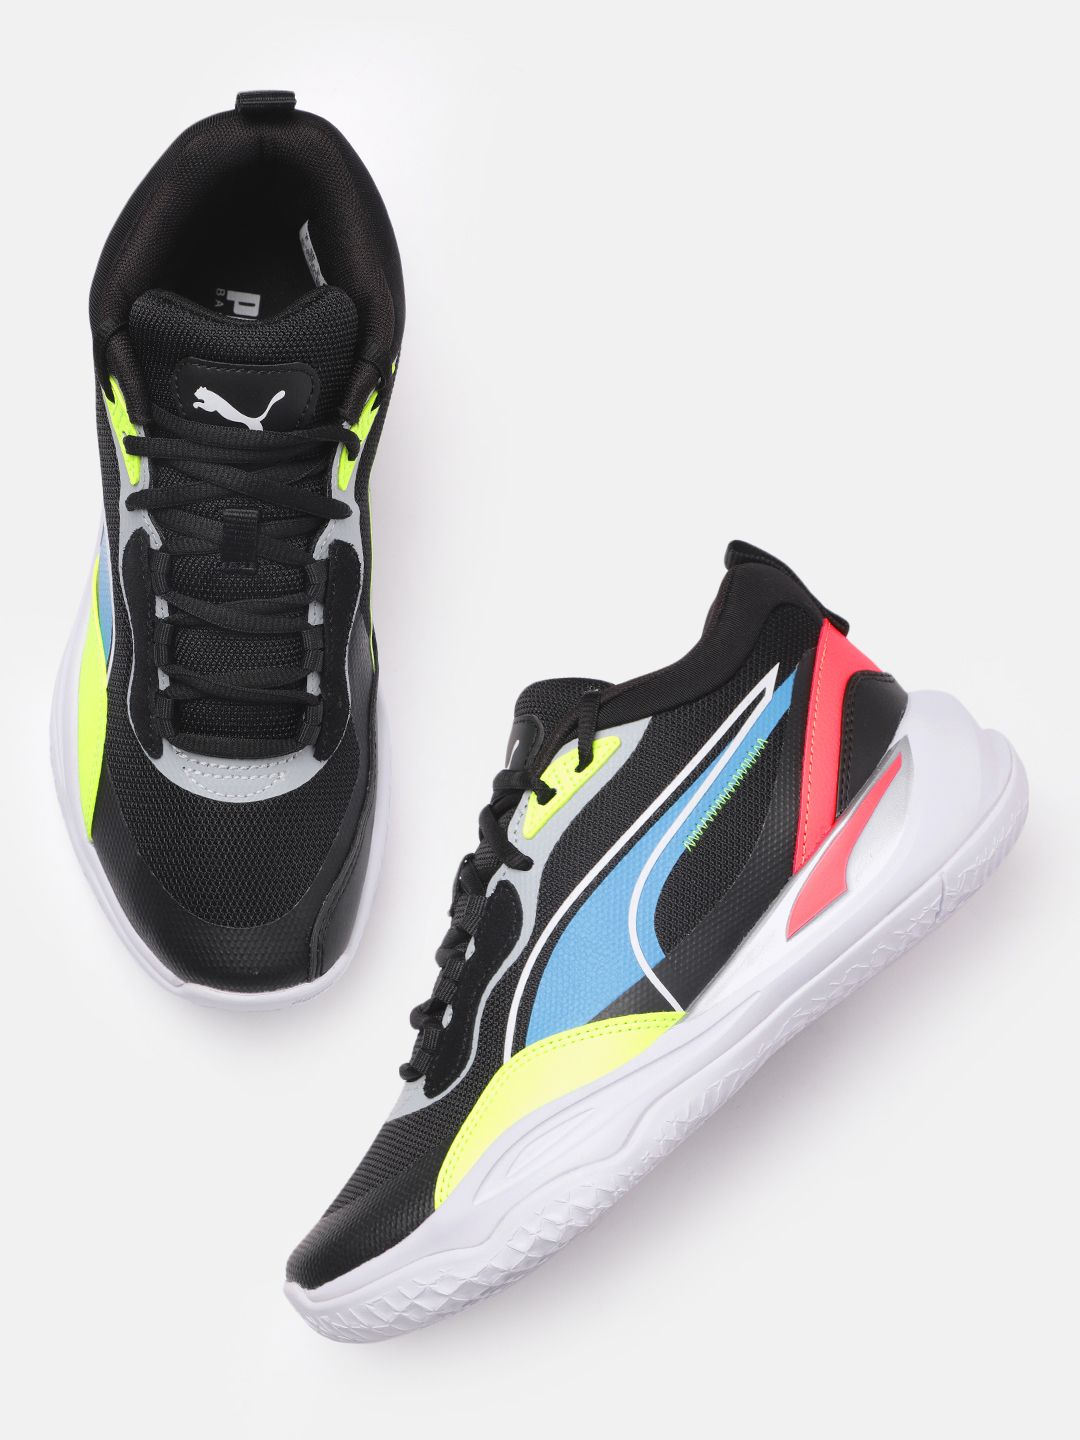 Puma Unisex Black Playmaker Pro Basketball Shoes Price in India